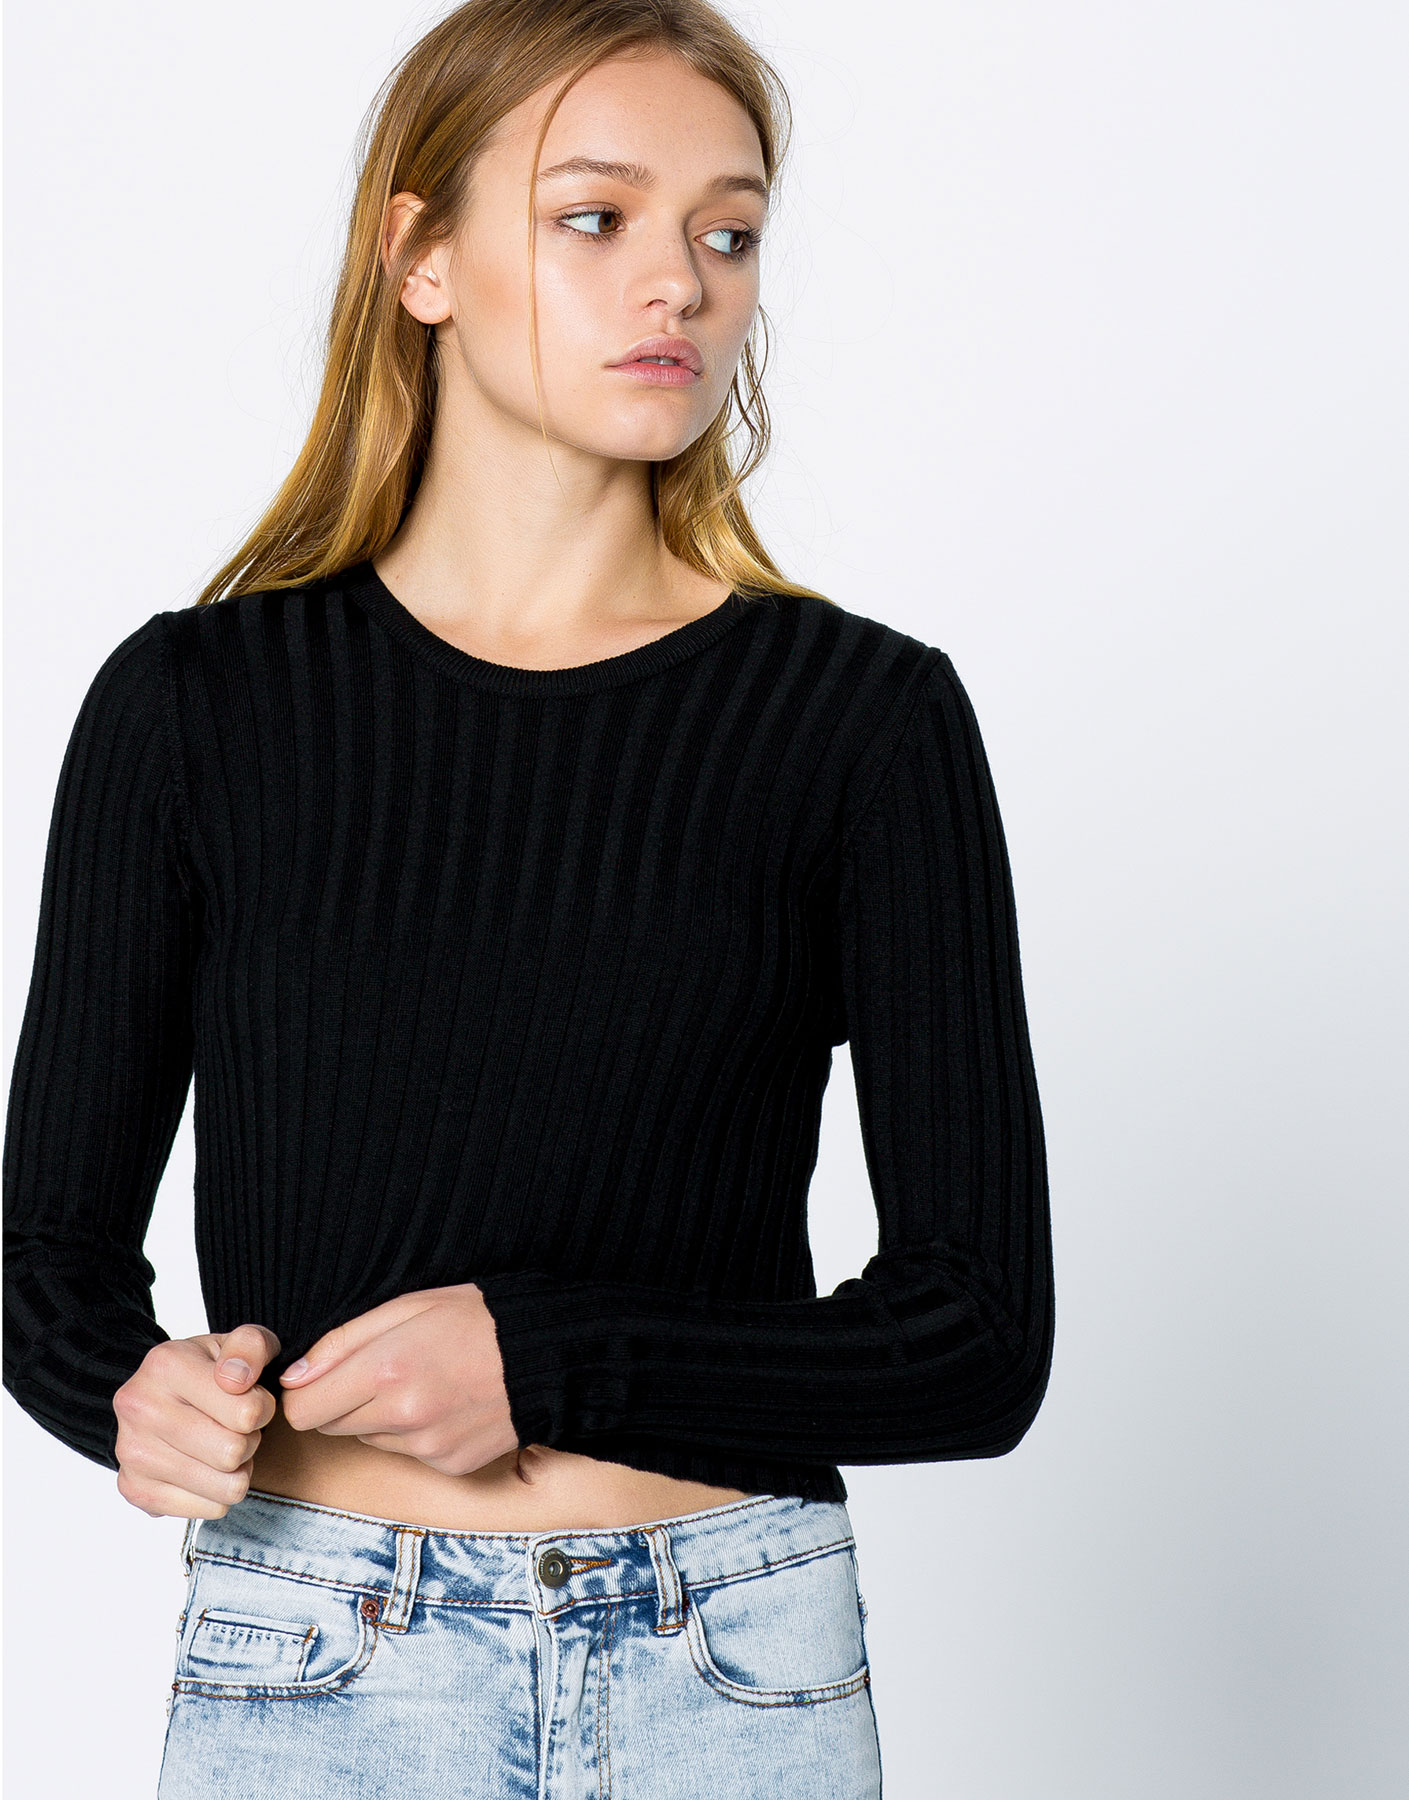 humanlike.co ROUND NECK PEARL KNIT SWEATER by Pull&Bear